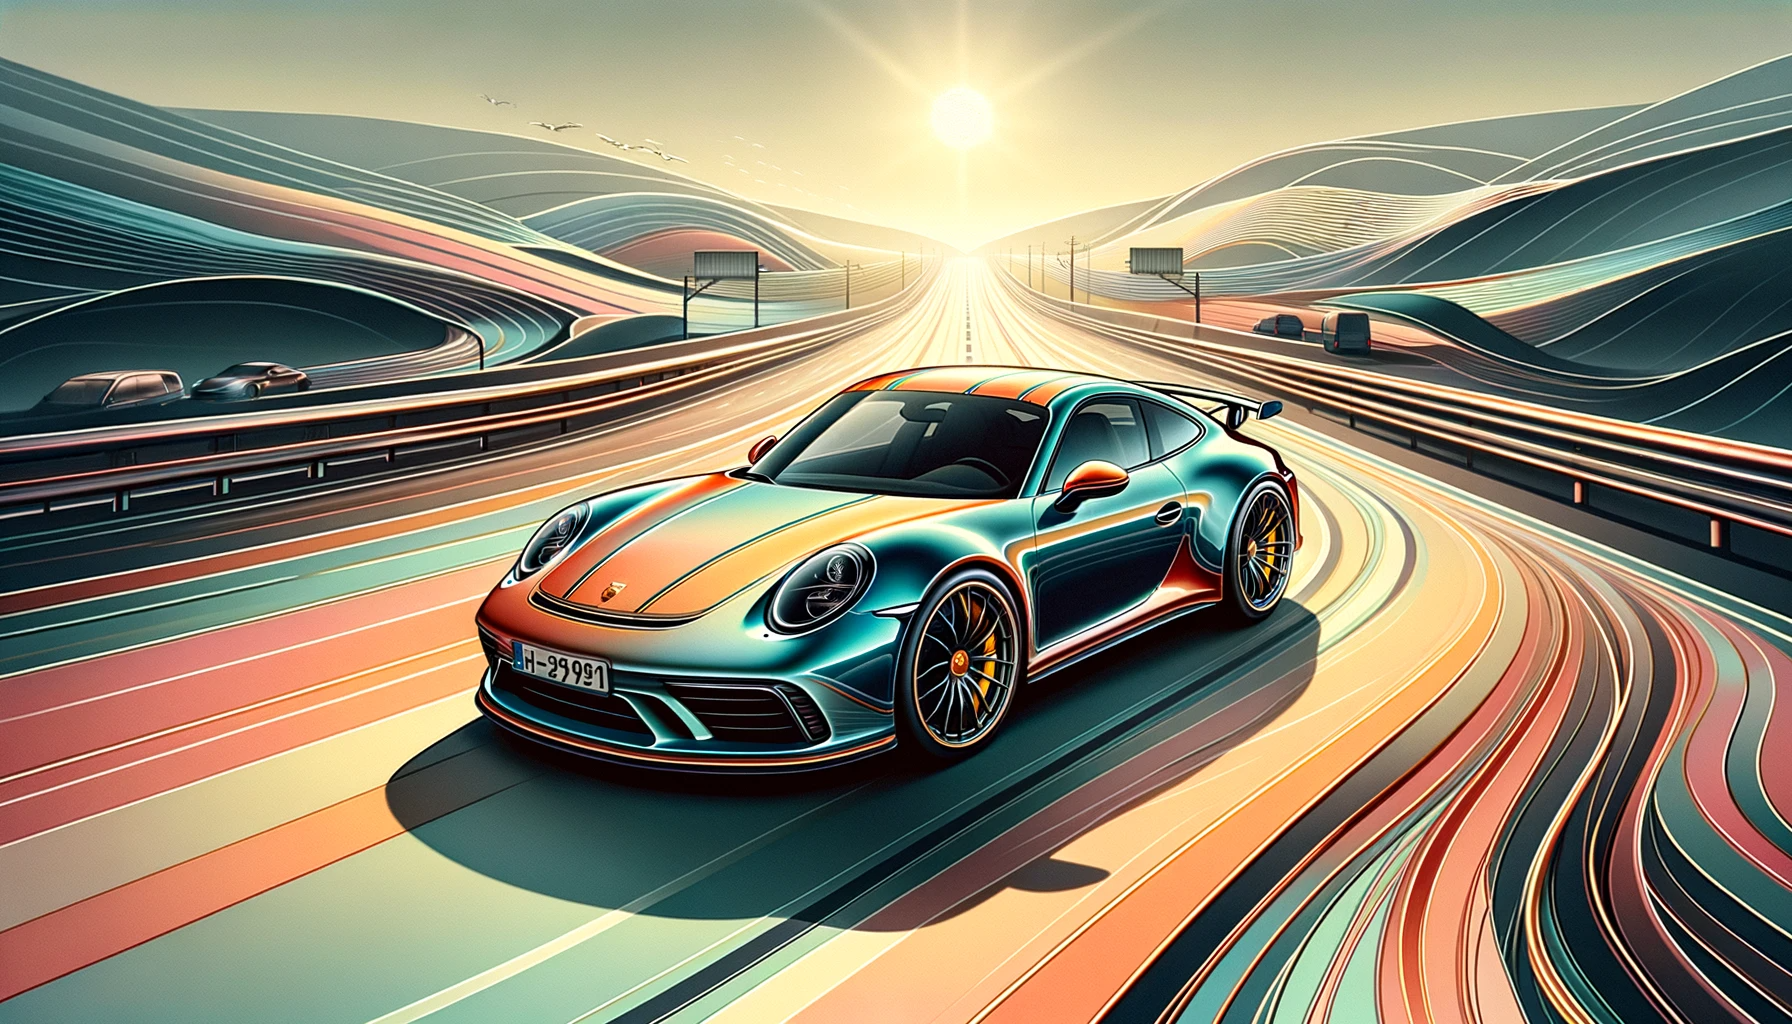 AI generated image of a GTS-based special edition Porsche 911. This car is the Porsche FT which celebrates free-moving traffic.